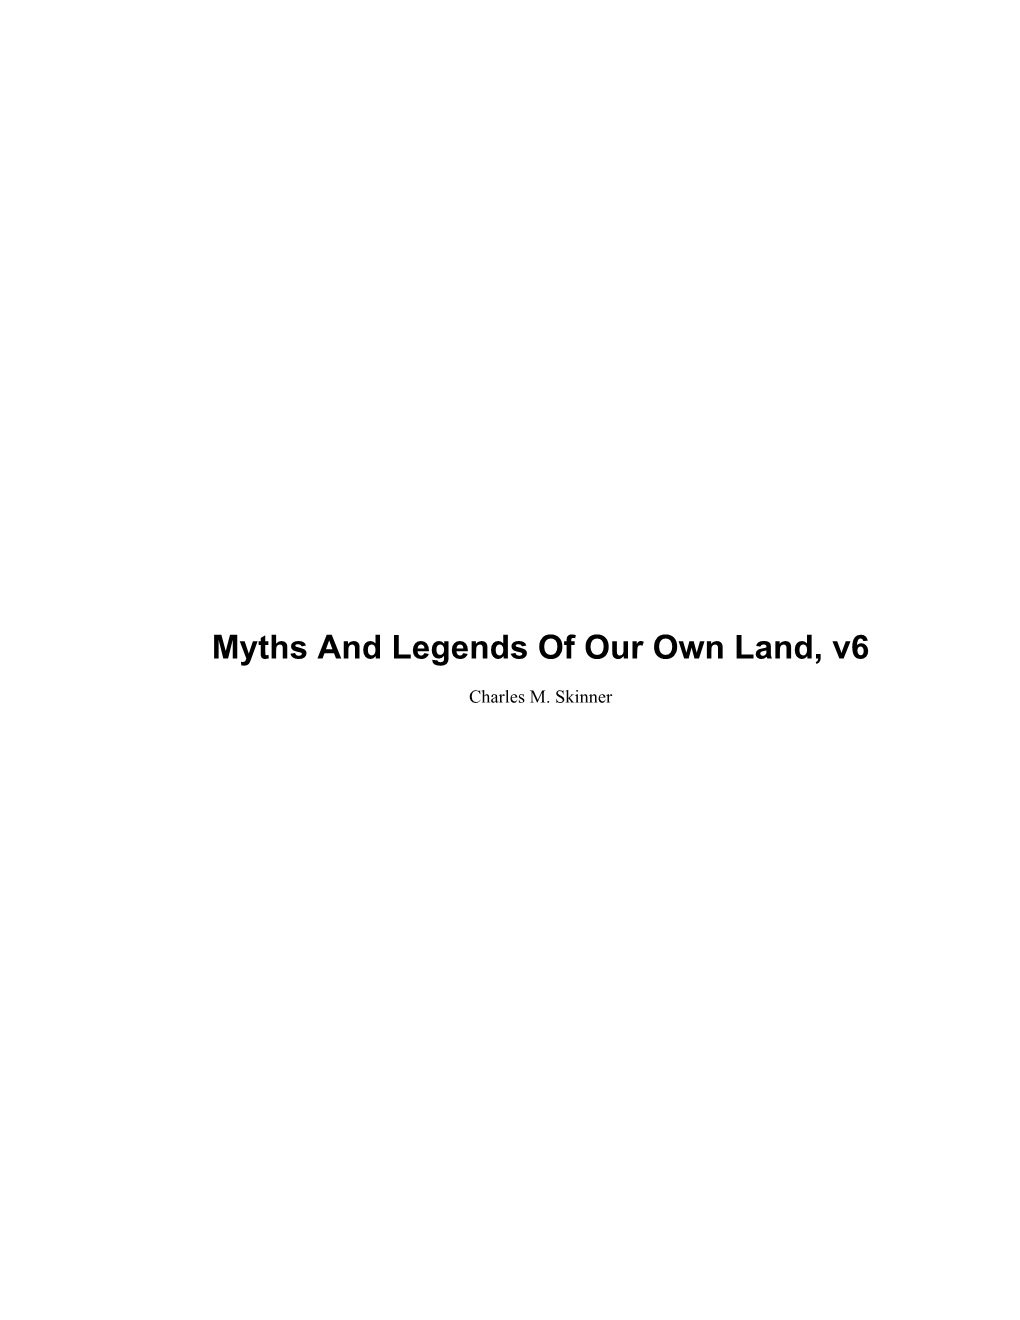 Myths and Legends of Our Own Land, V6